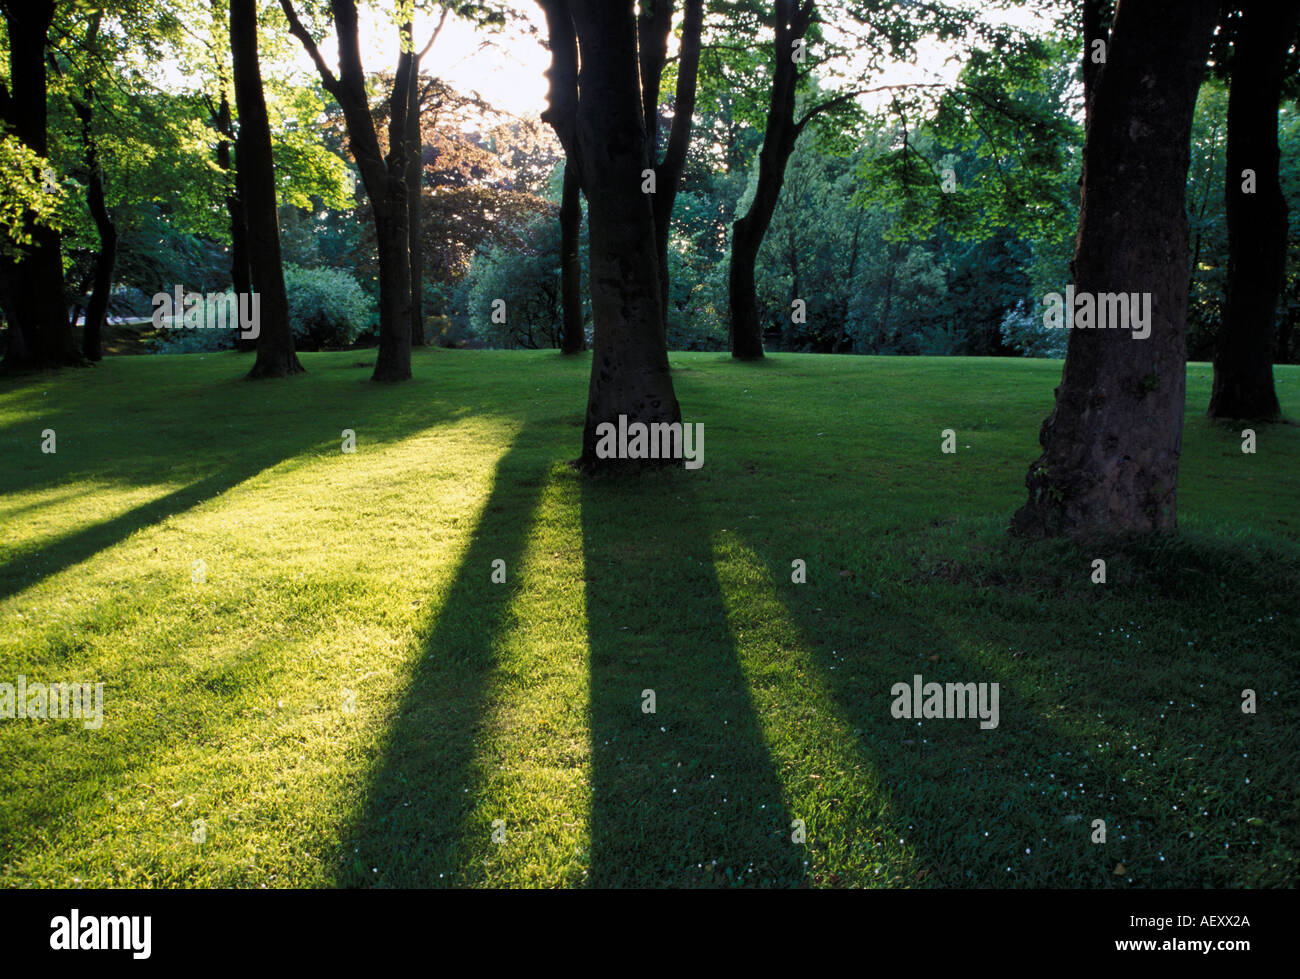 Landscape format image of city park trees casting shadows on green grass Stock Photo